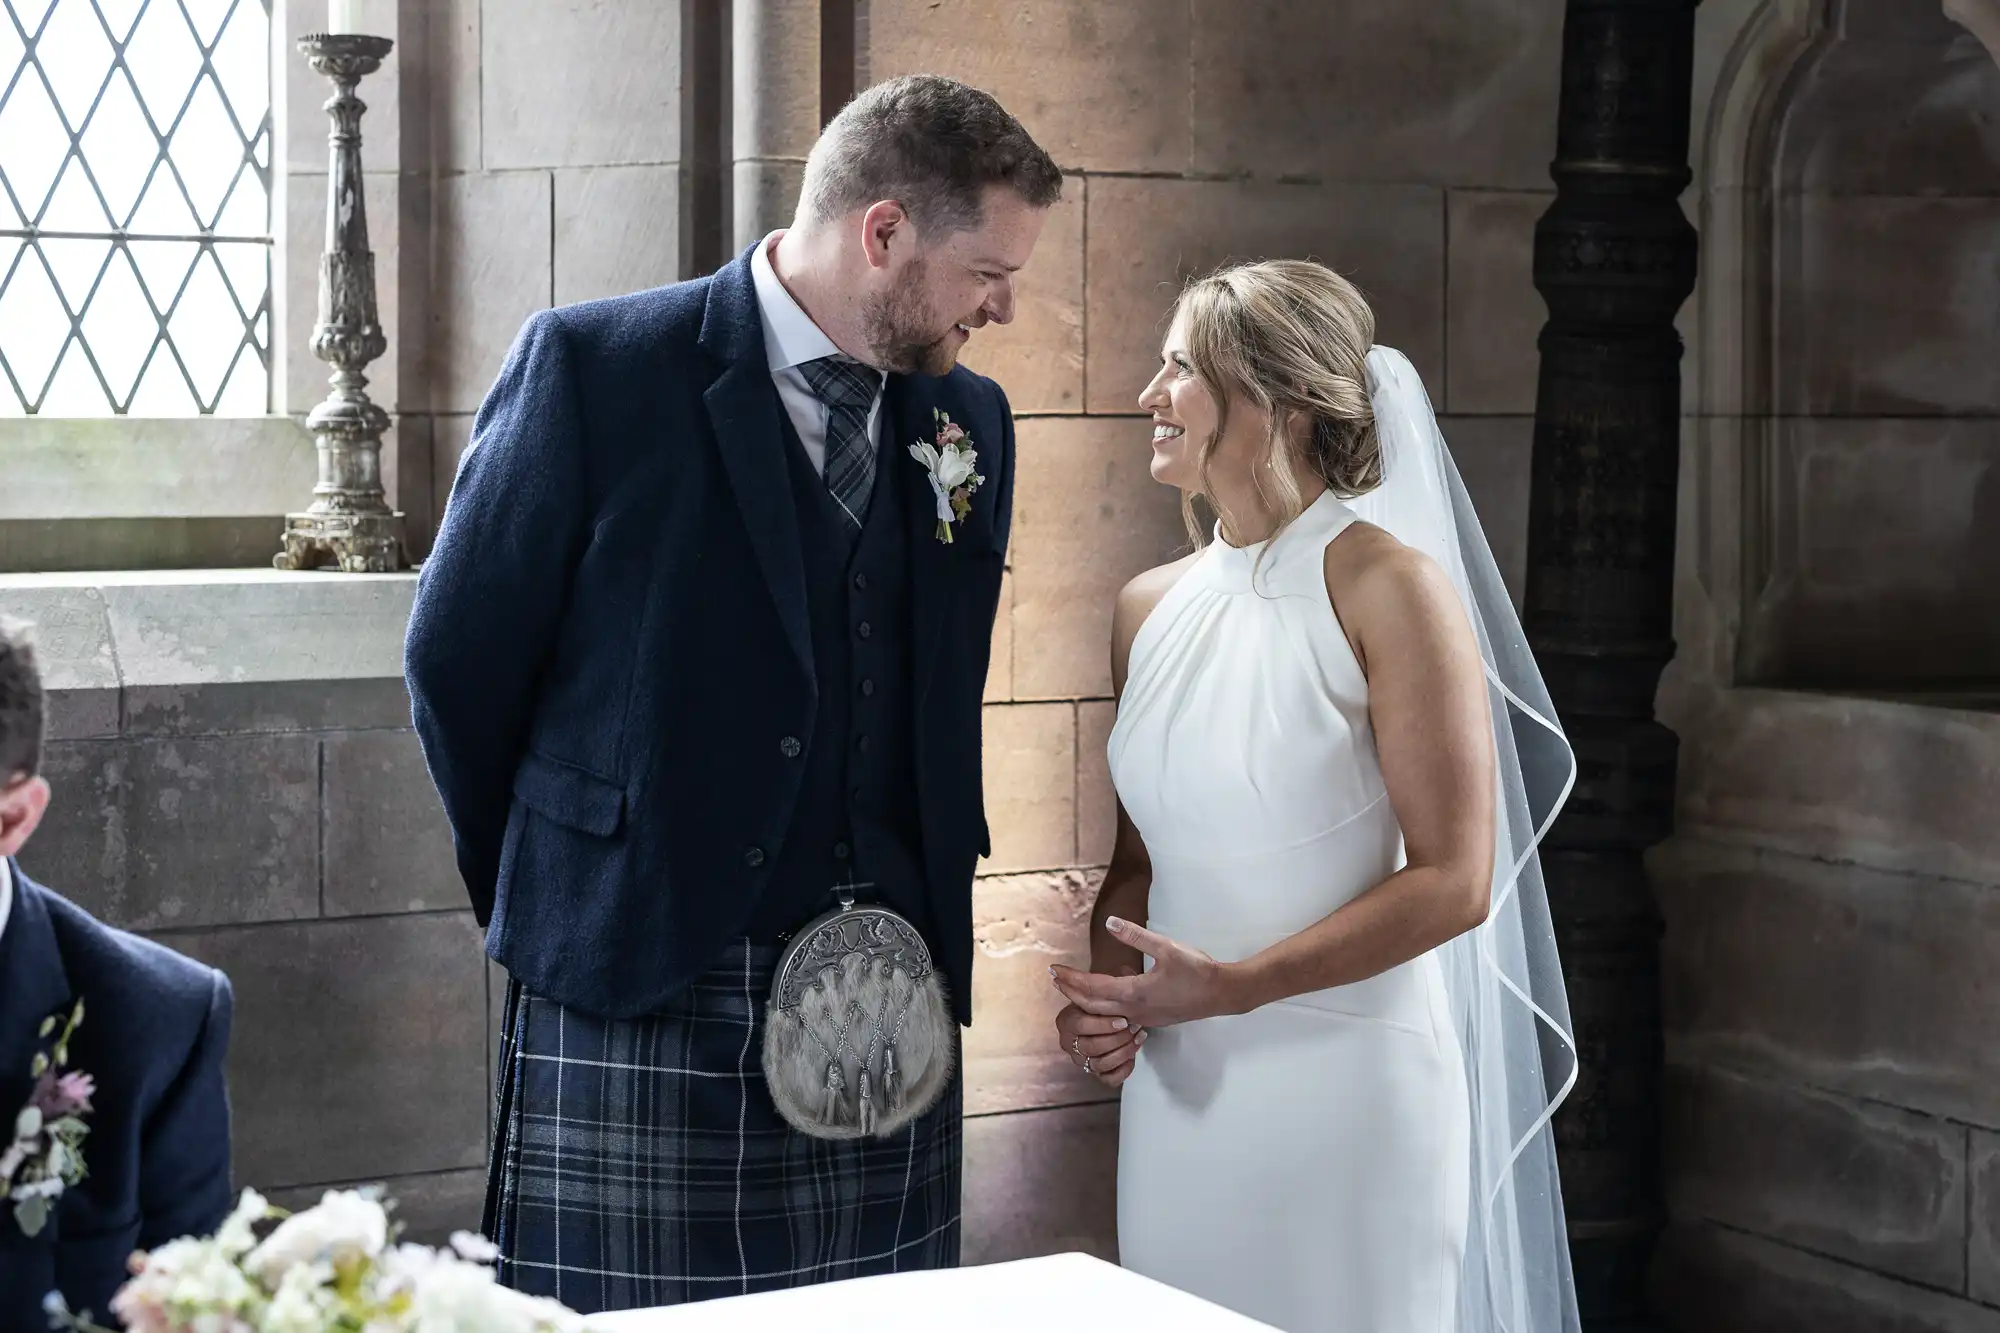 A bride and groom smiling at each other during their wedding ceremony inside a church, with the groom wearing traditional Scottish tartan attire.